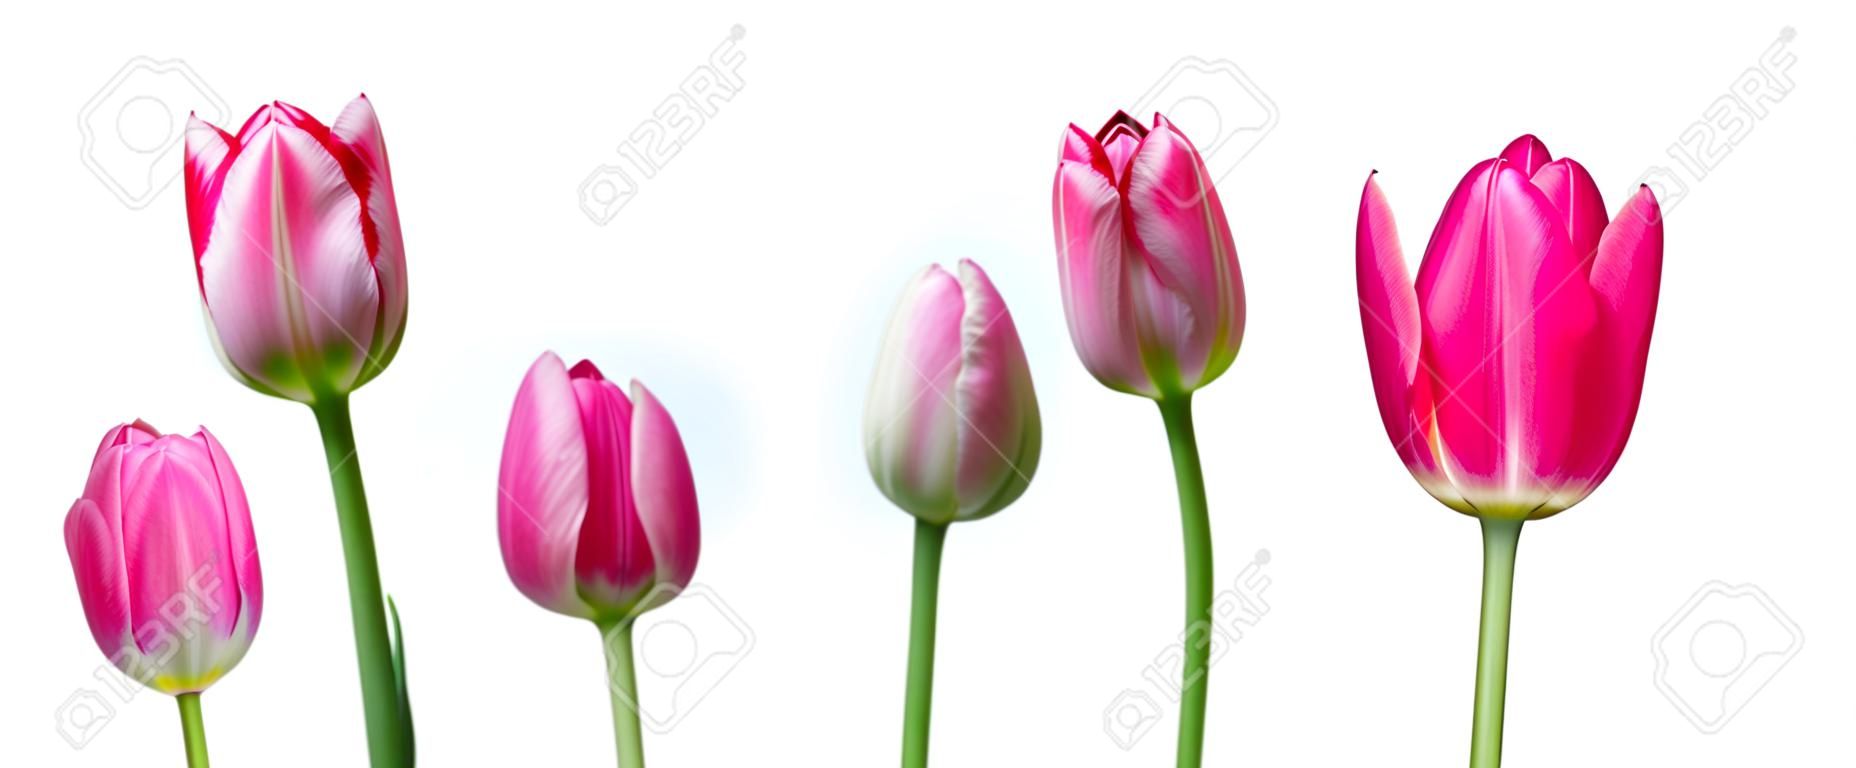 Tulips on white background. Close up. Stages of flowering tulip. From green bud to lush pink flower.